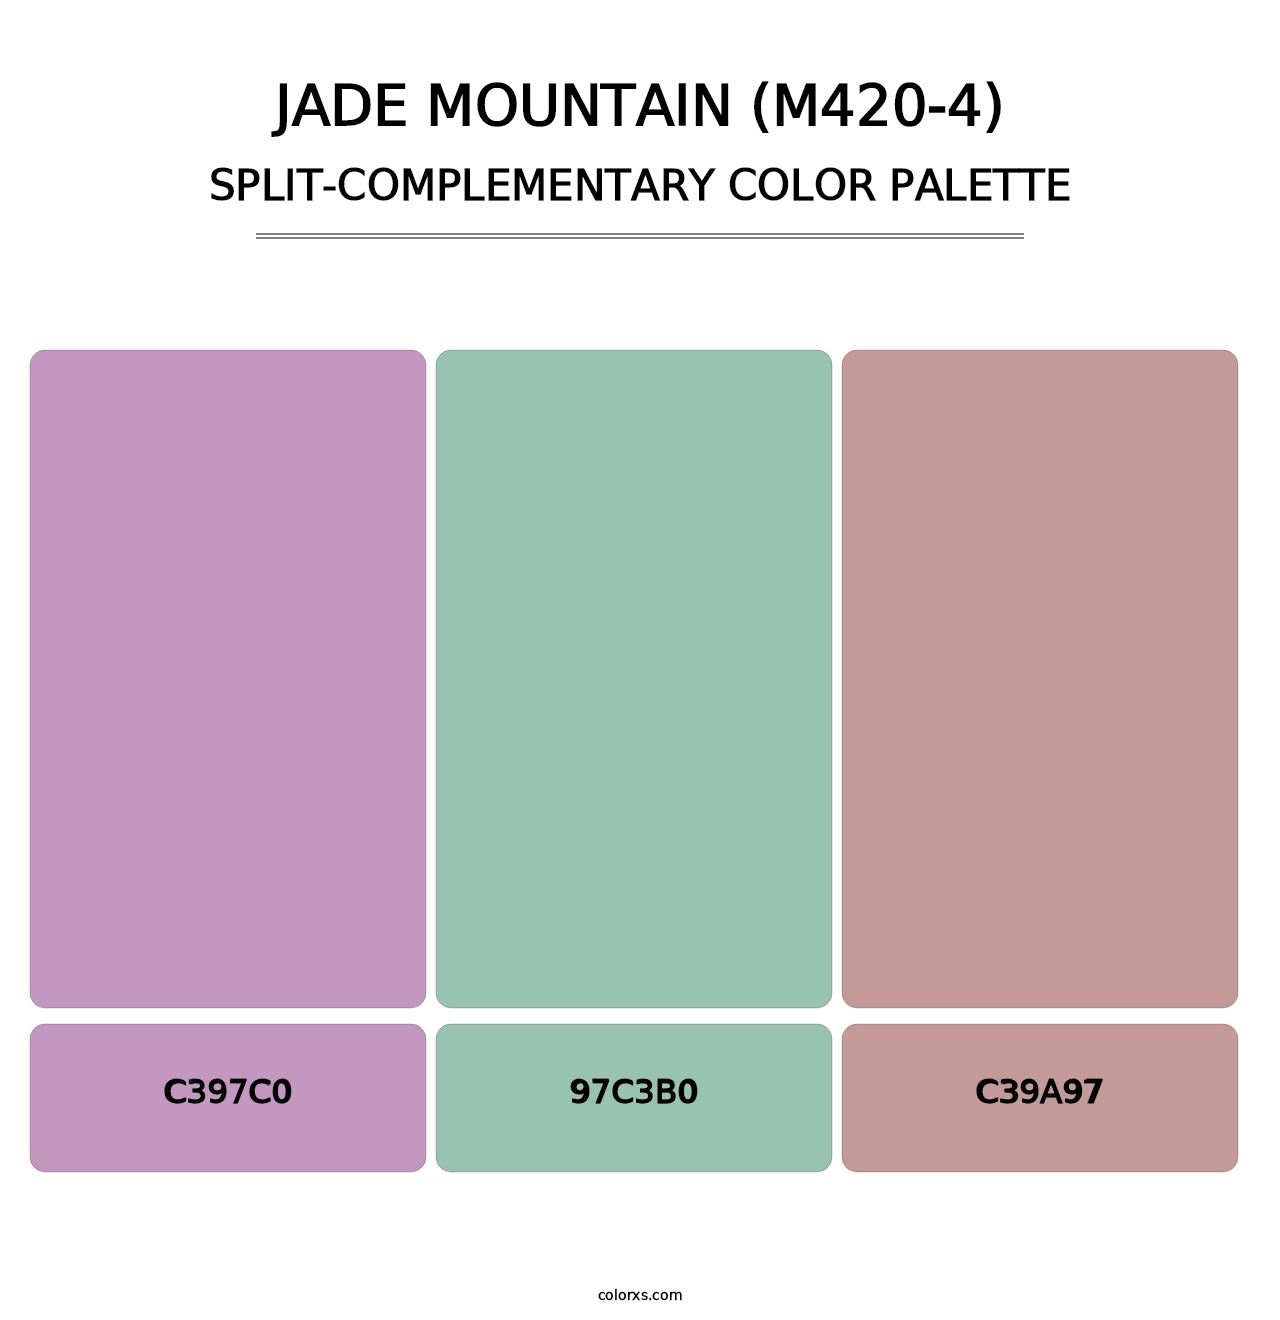 Jade Mountain (M420-4) - Split-Complementary Color Palette